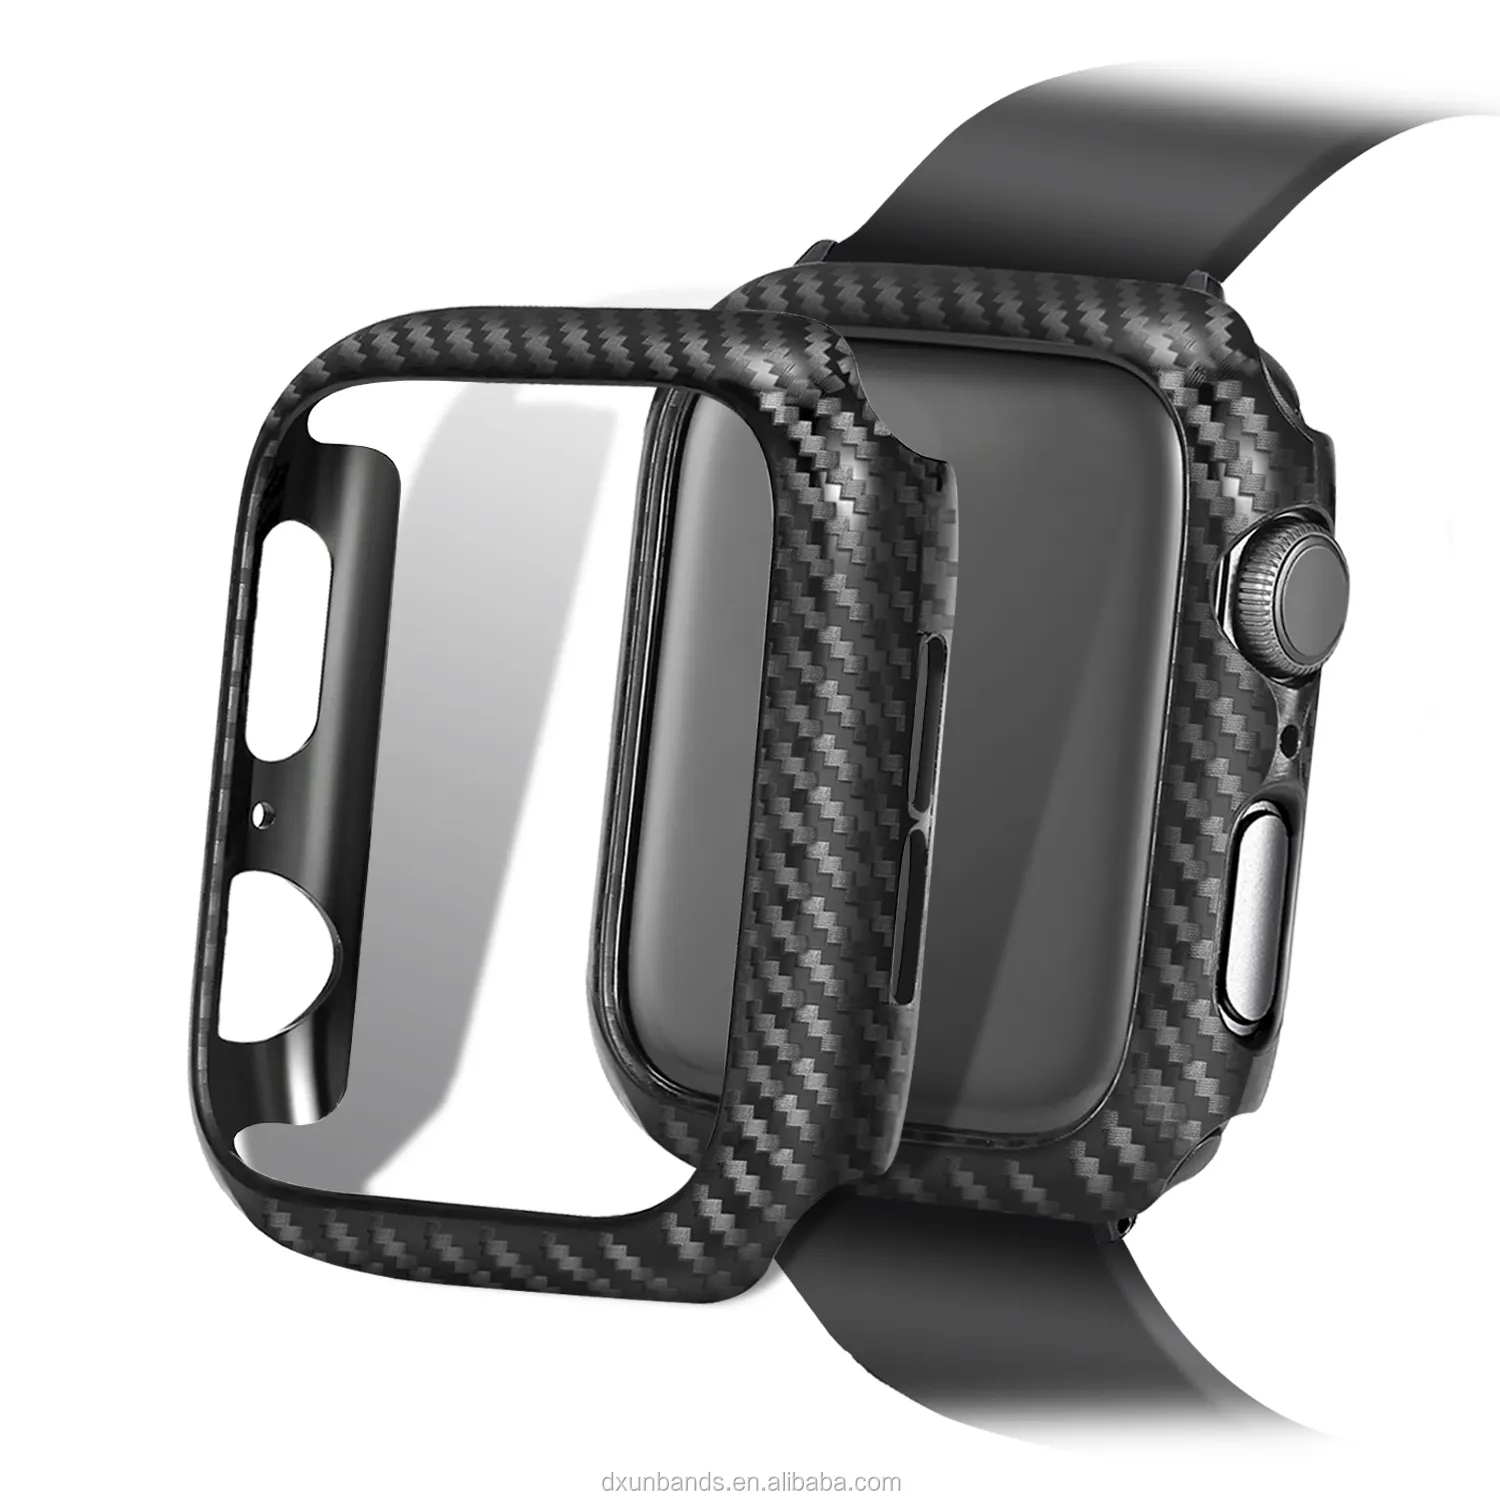 The Newest Design Carbon Fiber Cover Protective Case for Apple Watch Series 4/3/2/1 44mm 40mm 38mm 42mm TPU Case